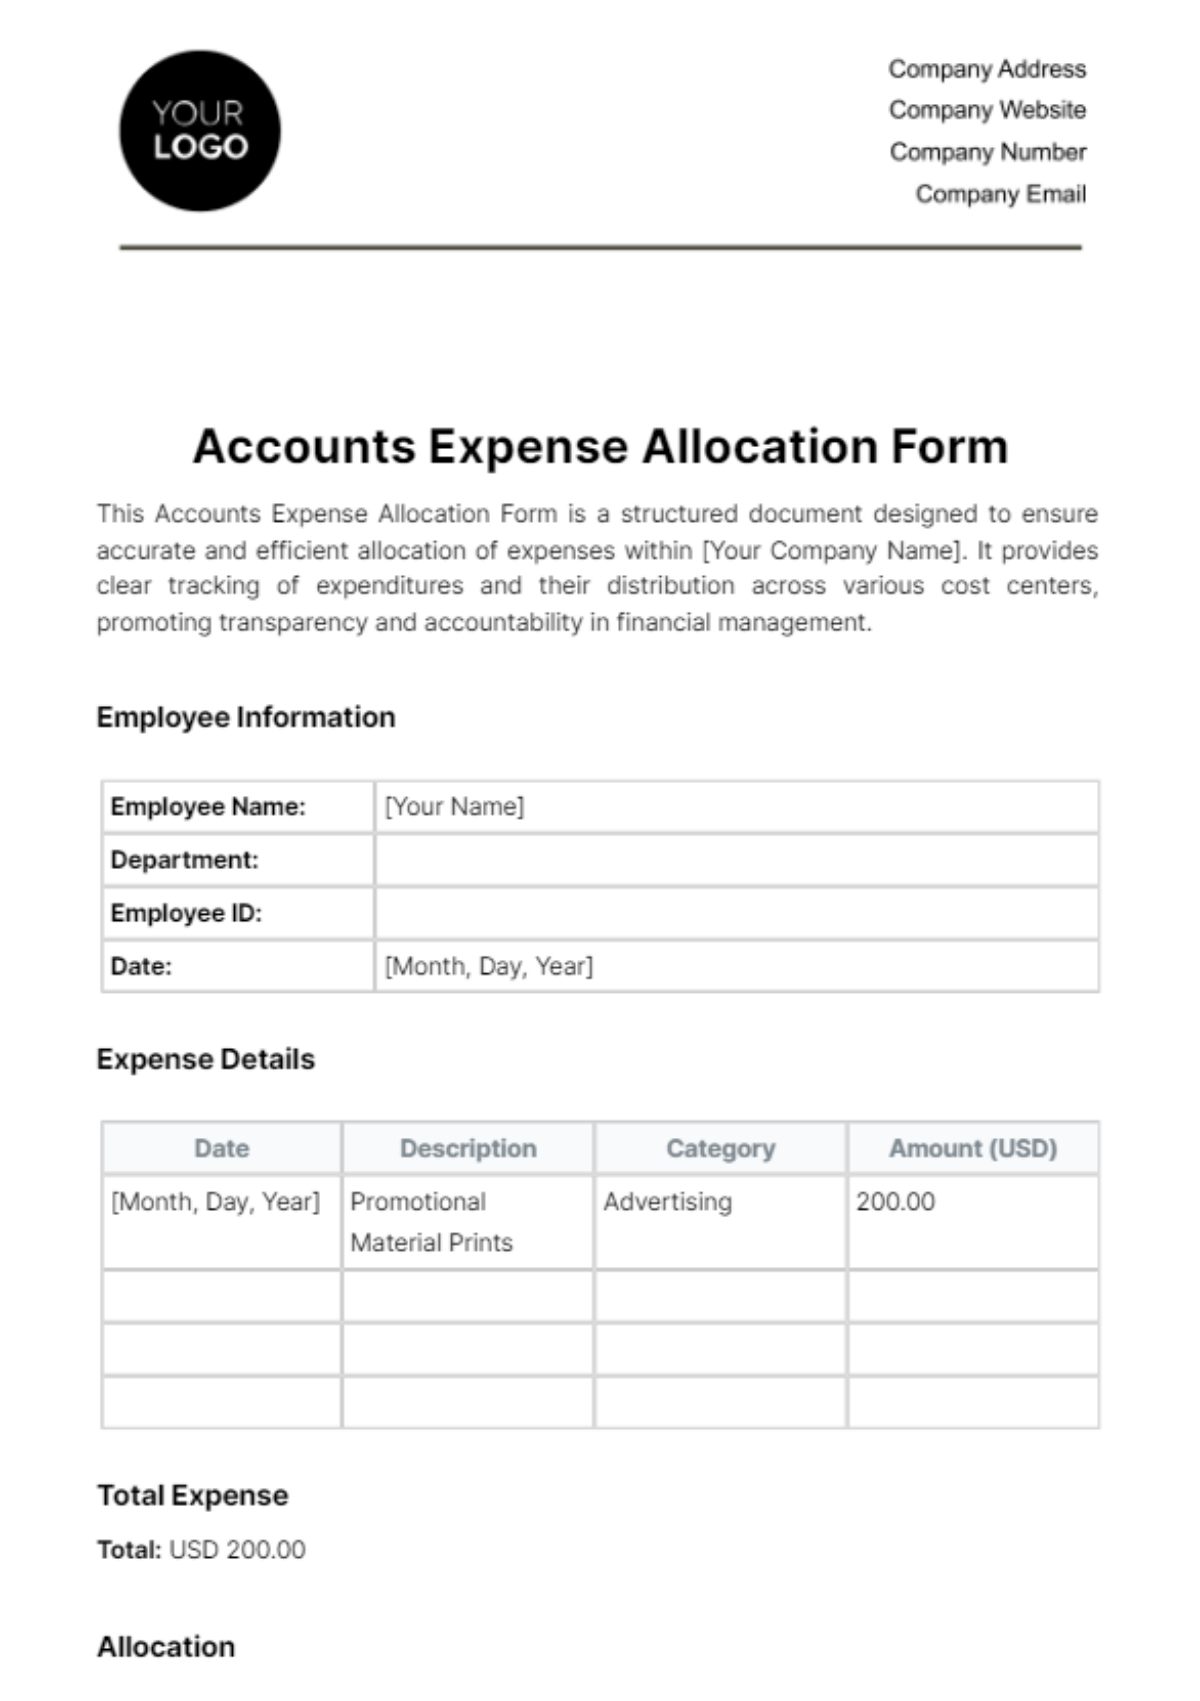 Accounts Expense Allocation Form Template